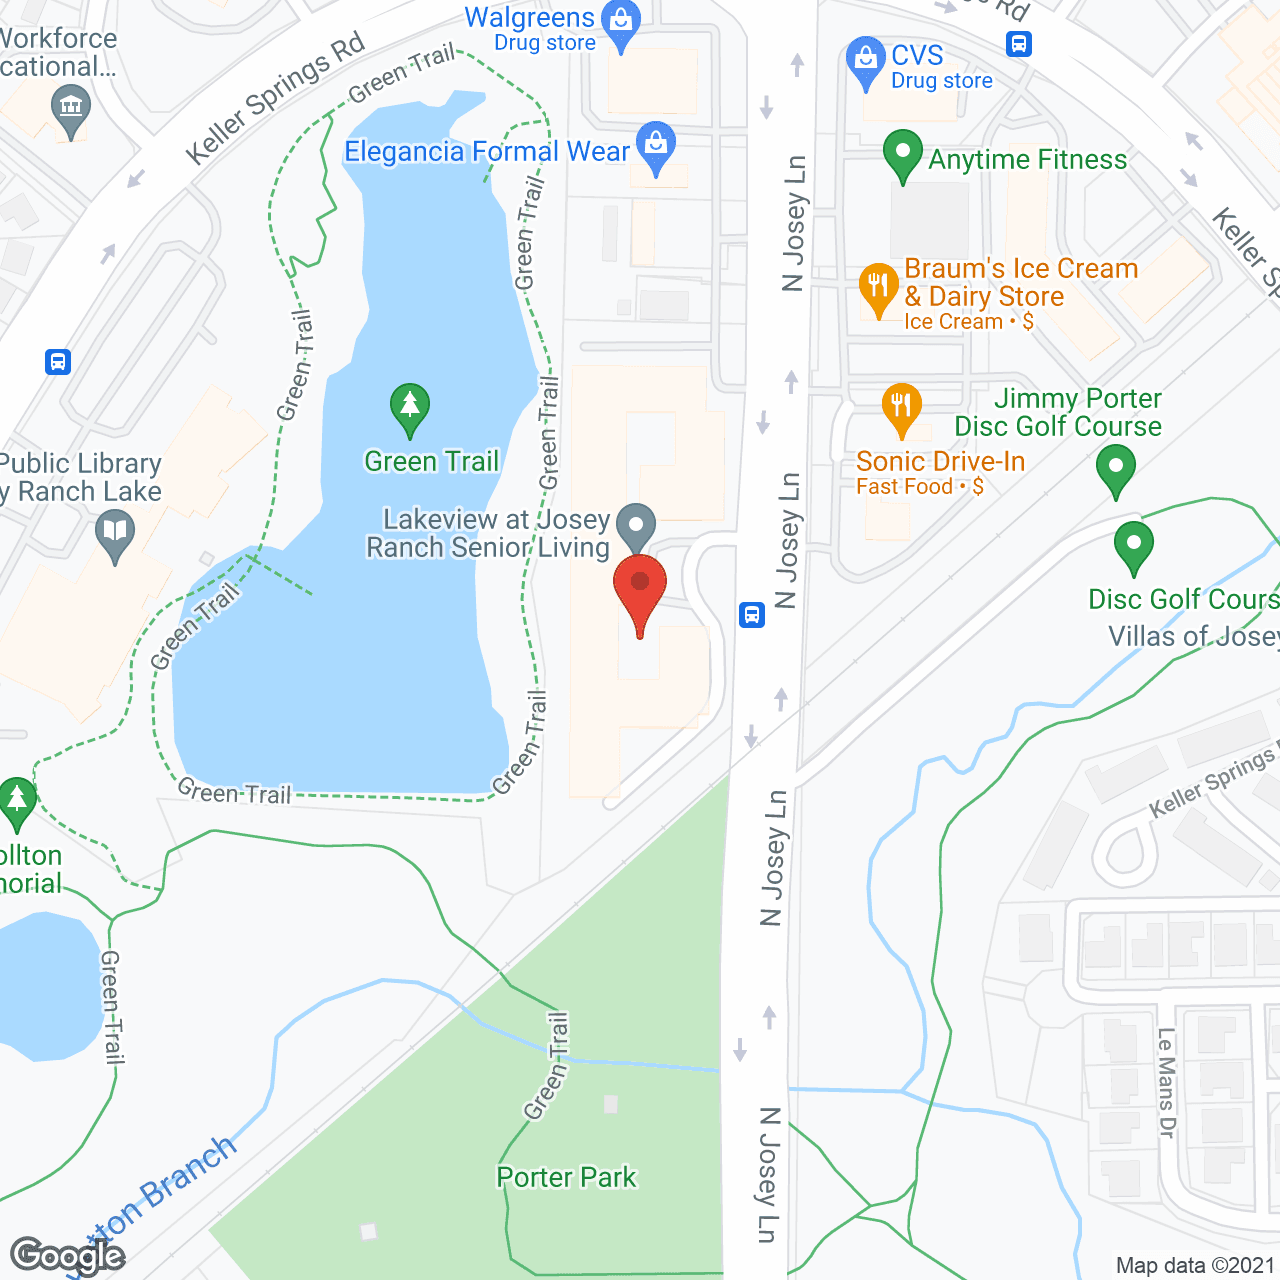 Lakeview at Josey Ranch Senior Living in google map